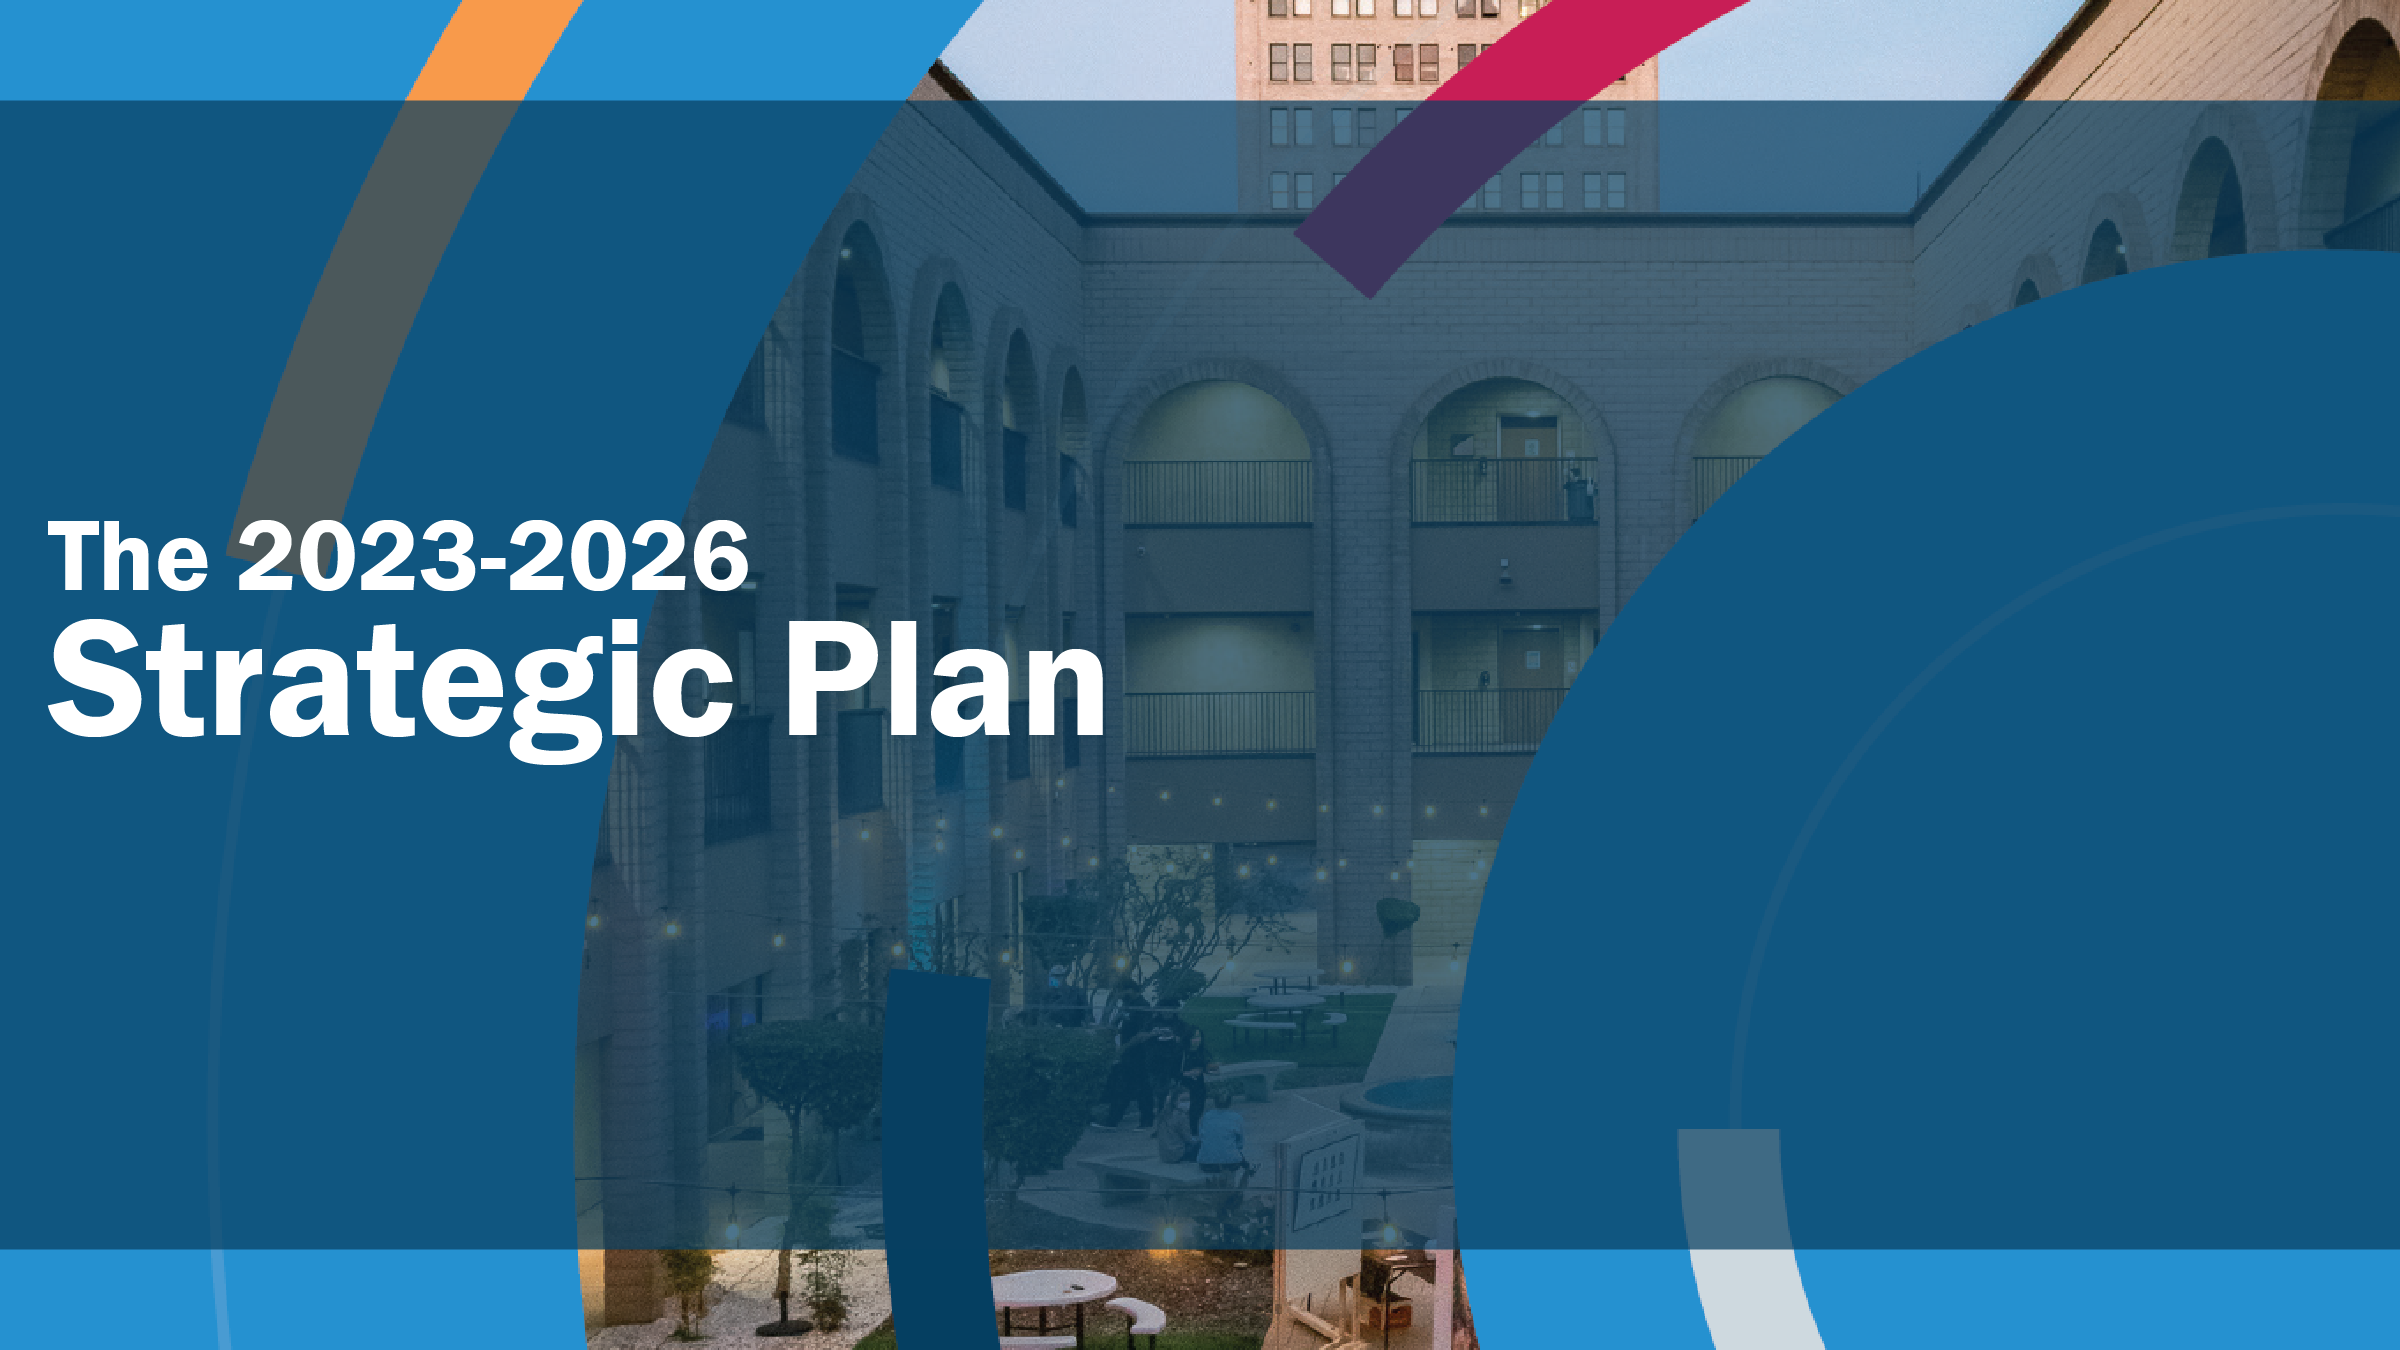 image for decoration with words the 2023-2026 strategic plan